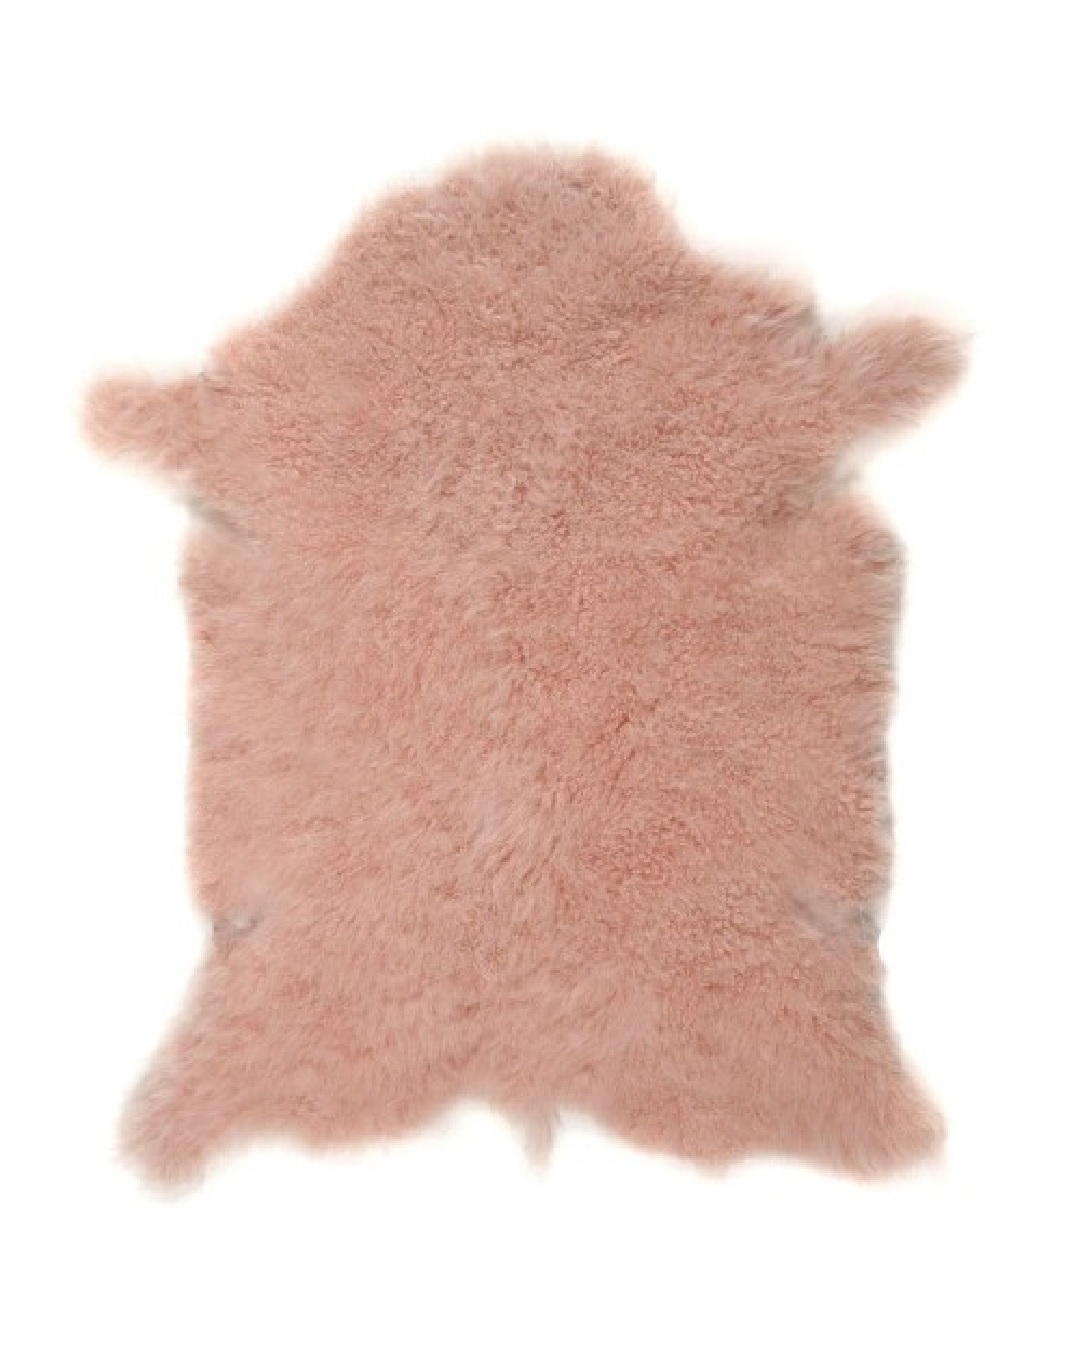 Cashmere hide in soft pink